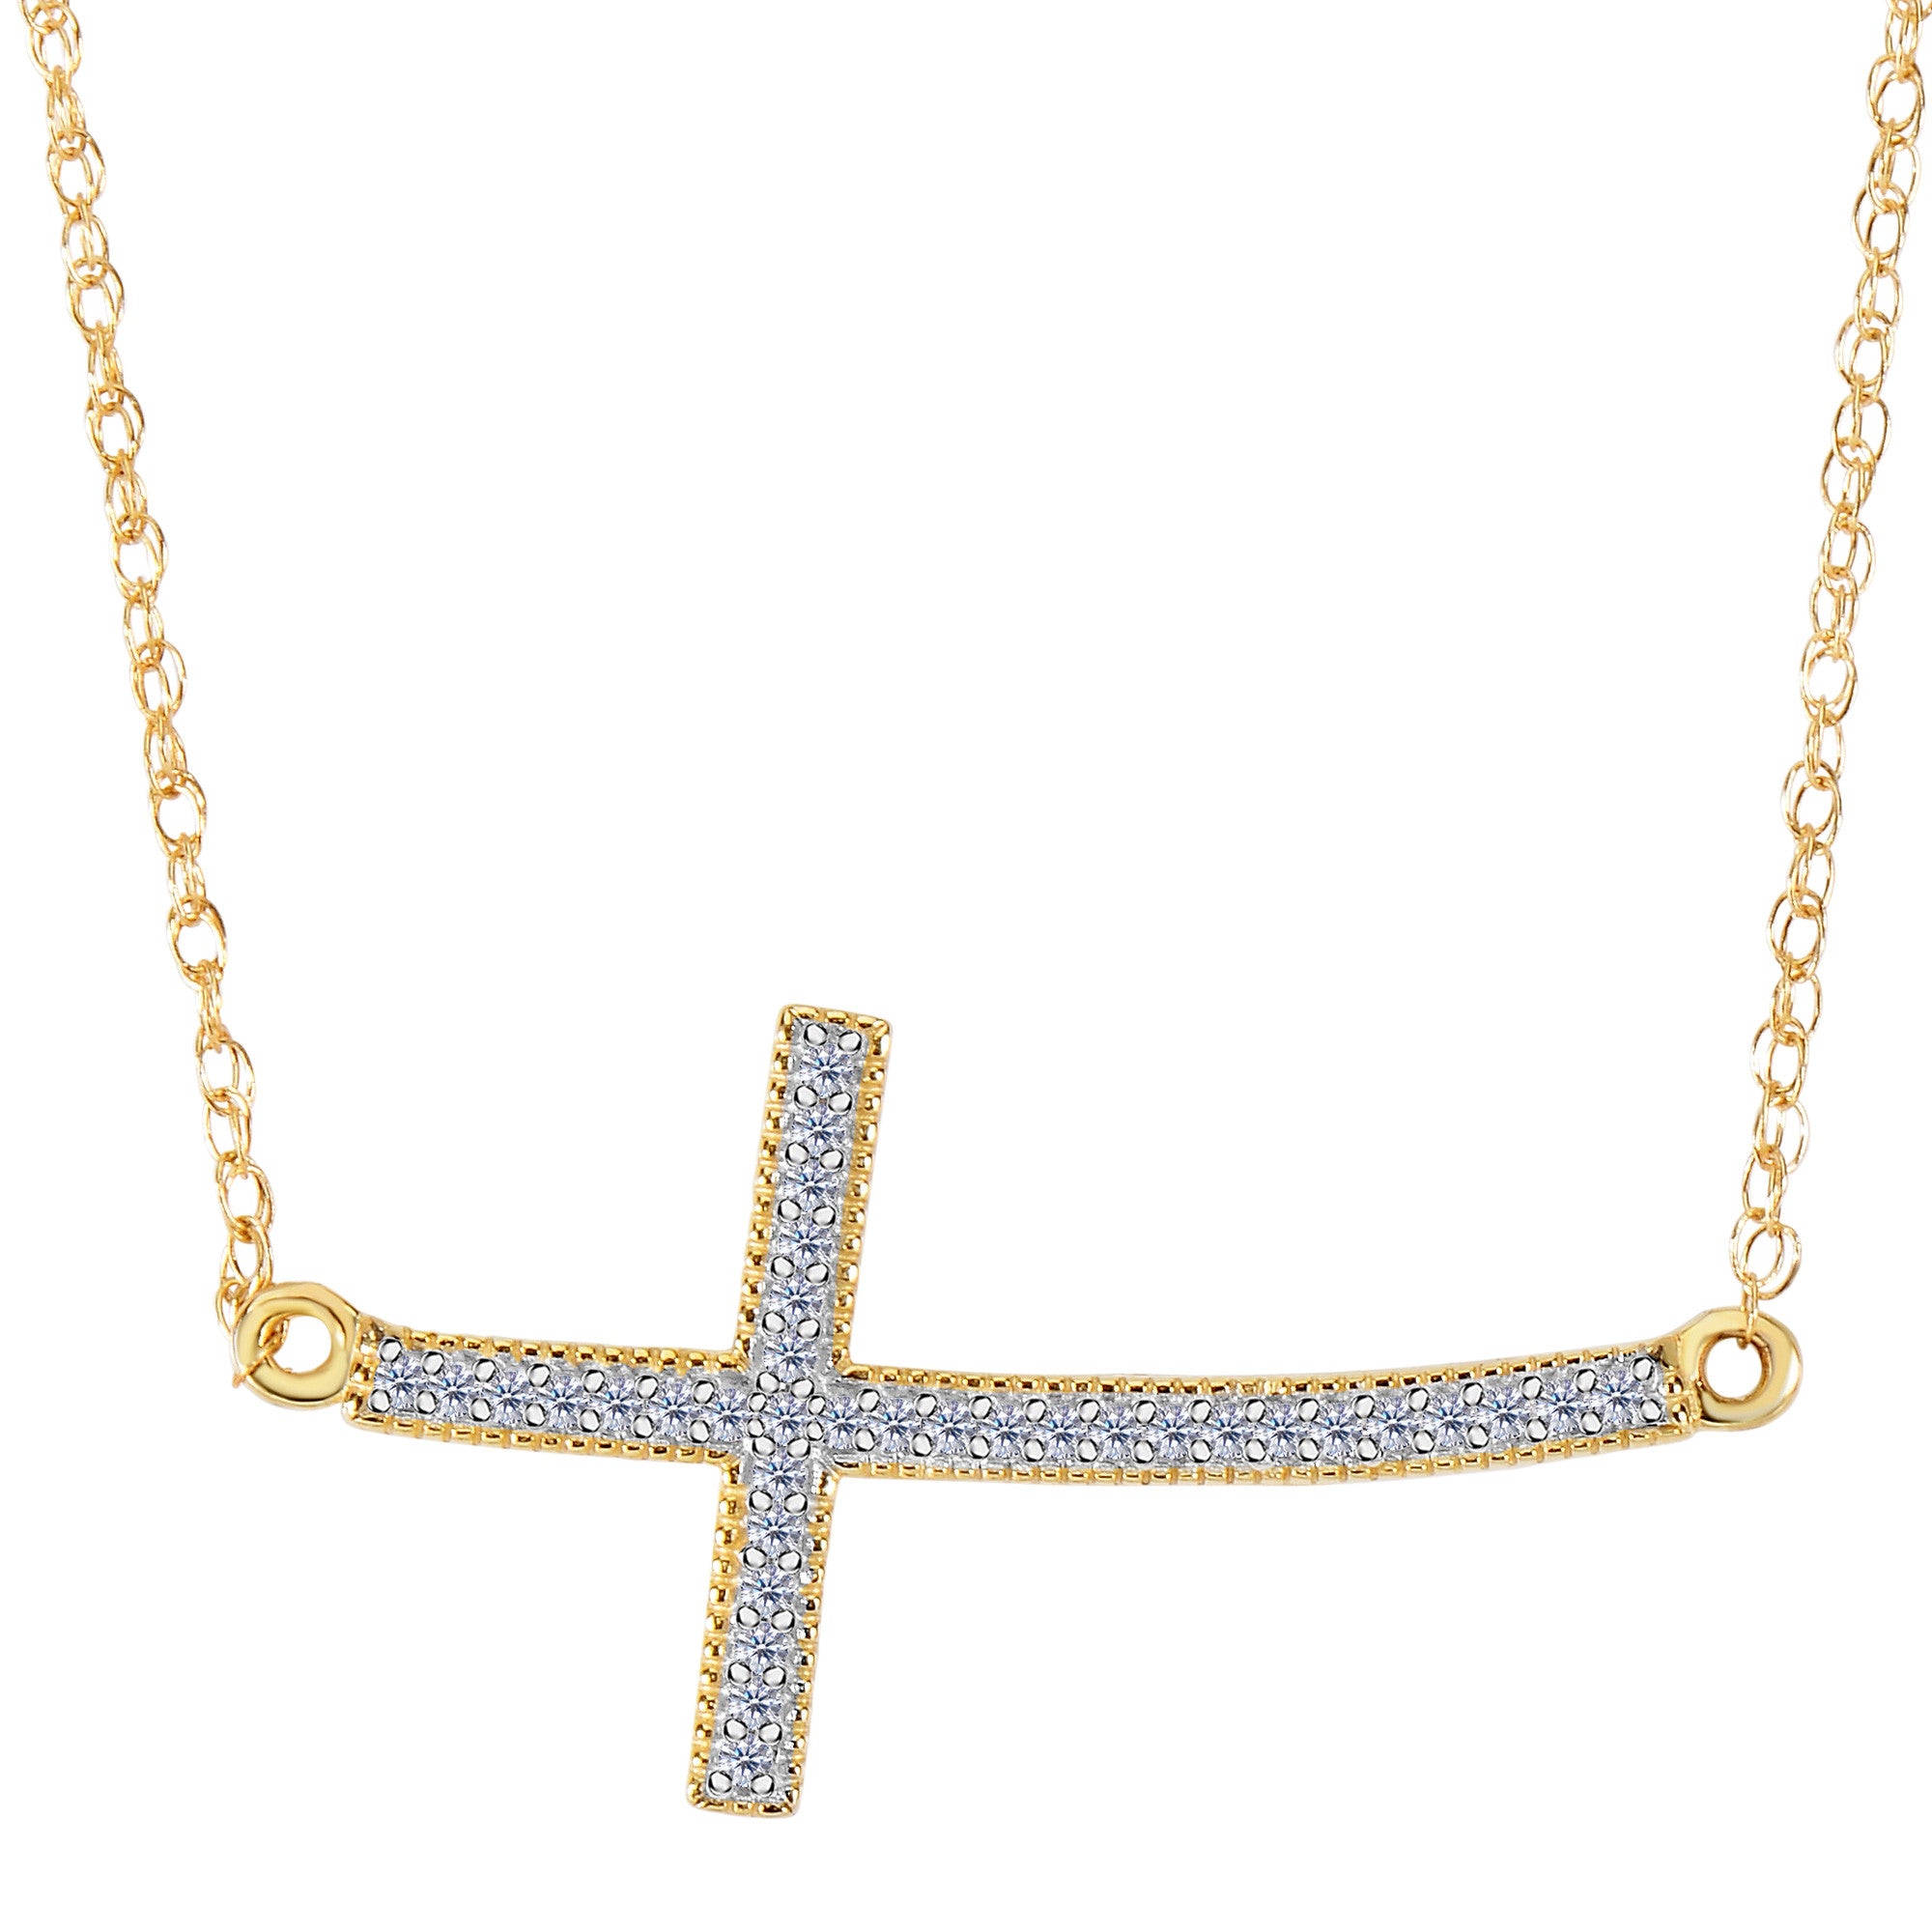 14k Yellow Gold With 0.08ct Diamonds Curved Side Ways Cross Millgrain Necklace - 18 Inches - JewelryAffairs
 - 1